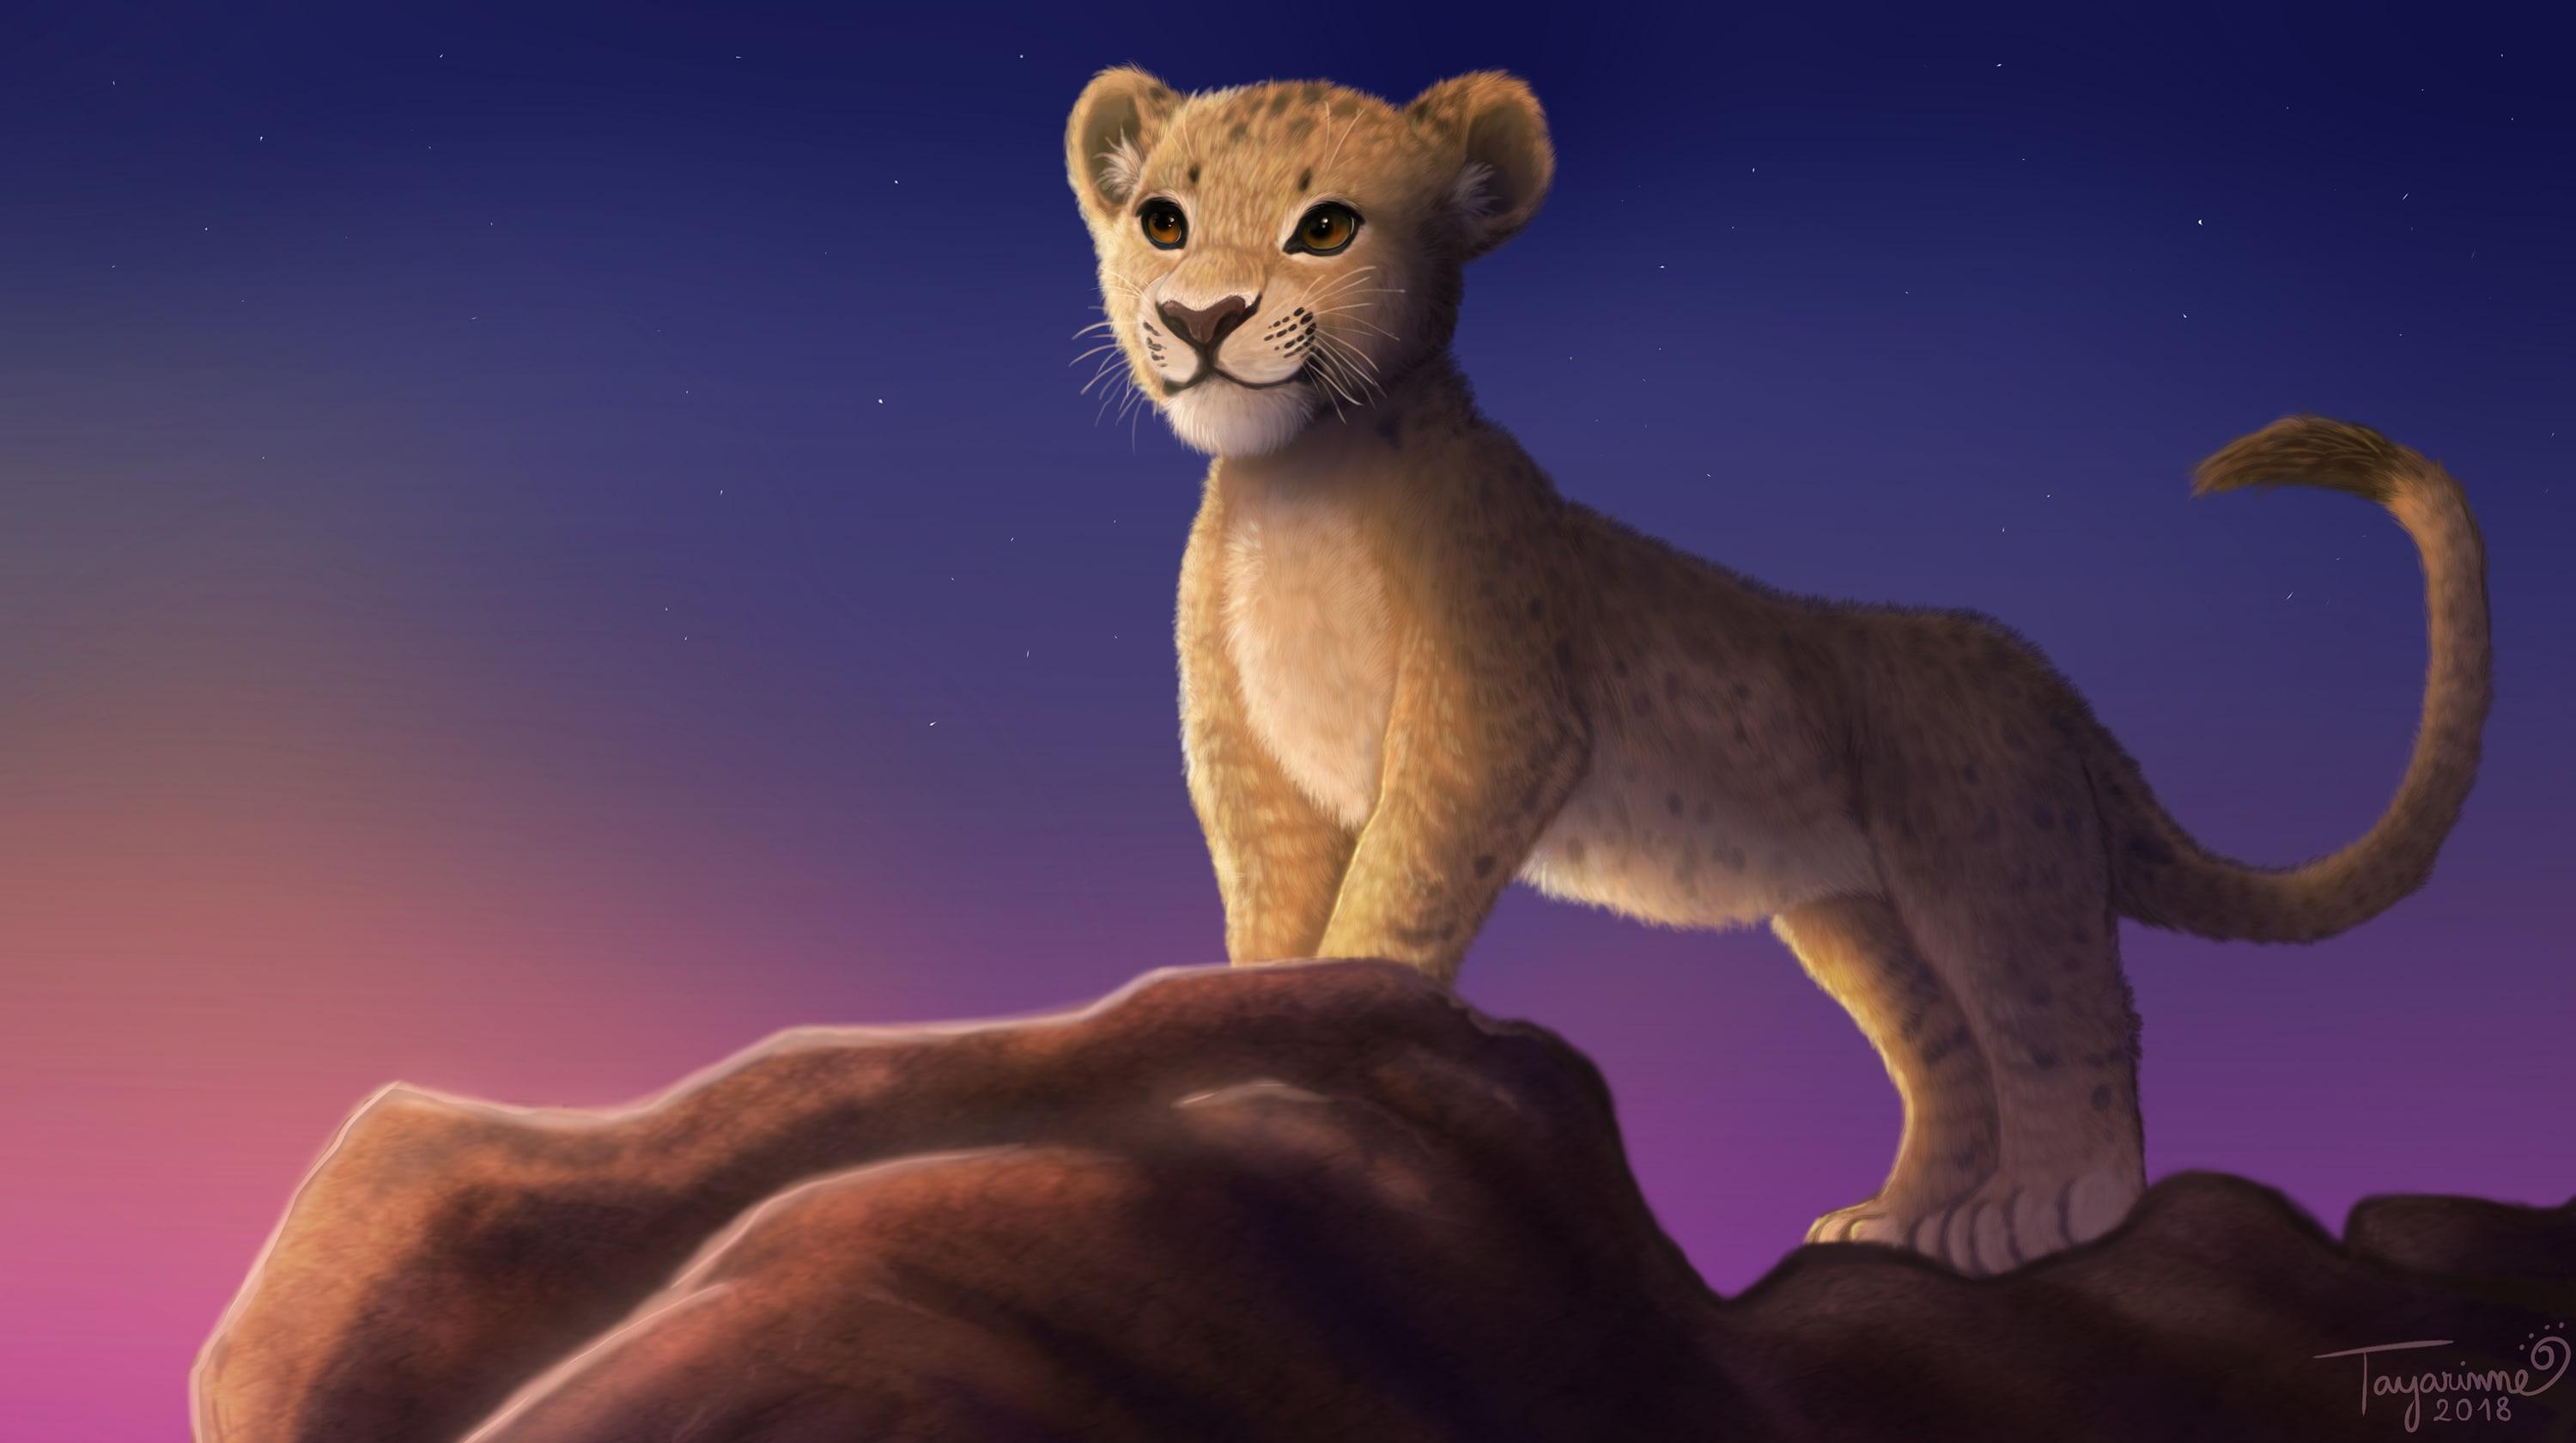 The Lion King 2019 HD Image